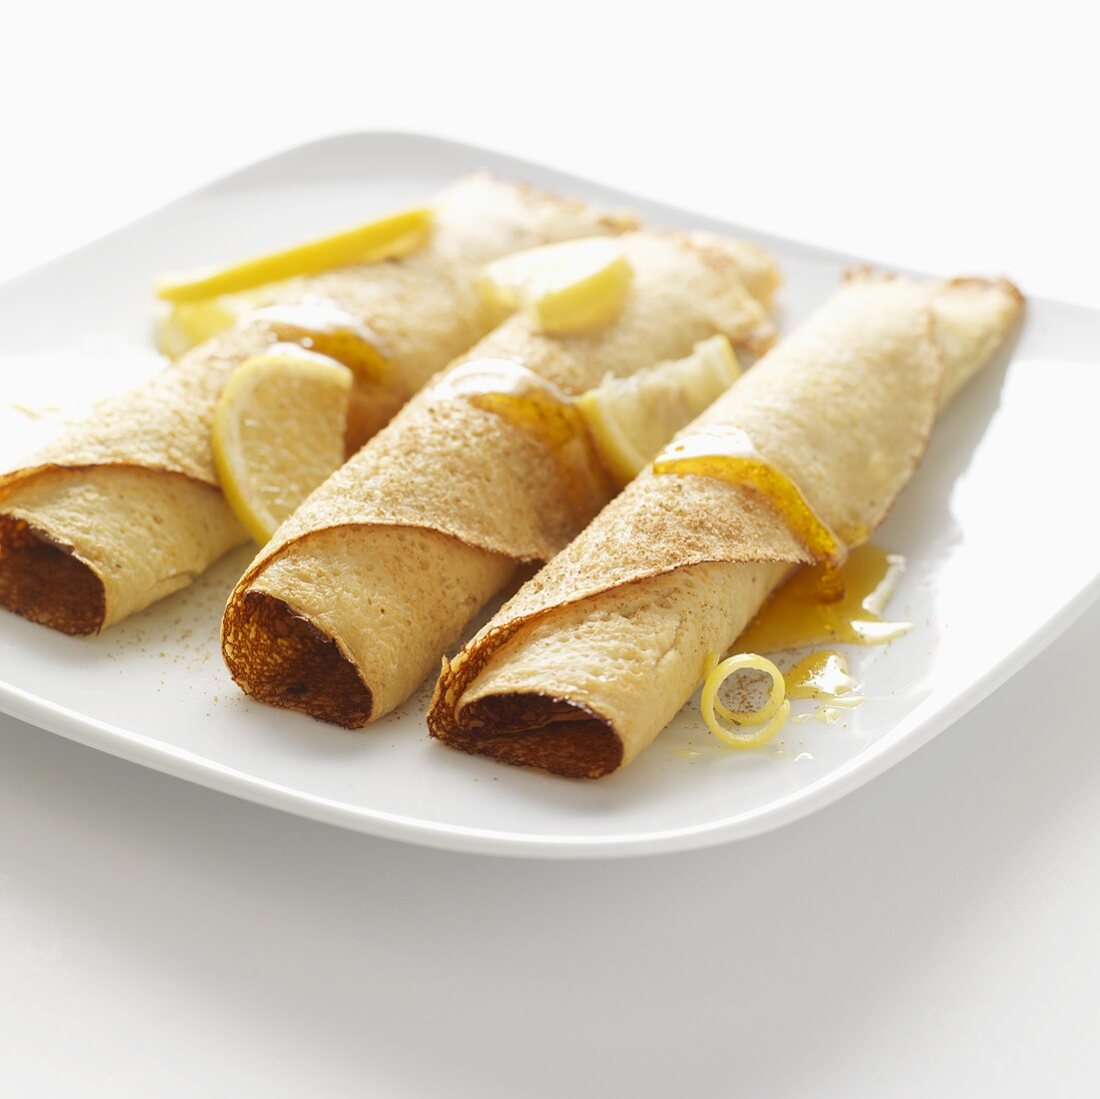 Lemon crepes with syrup